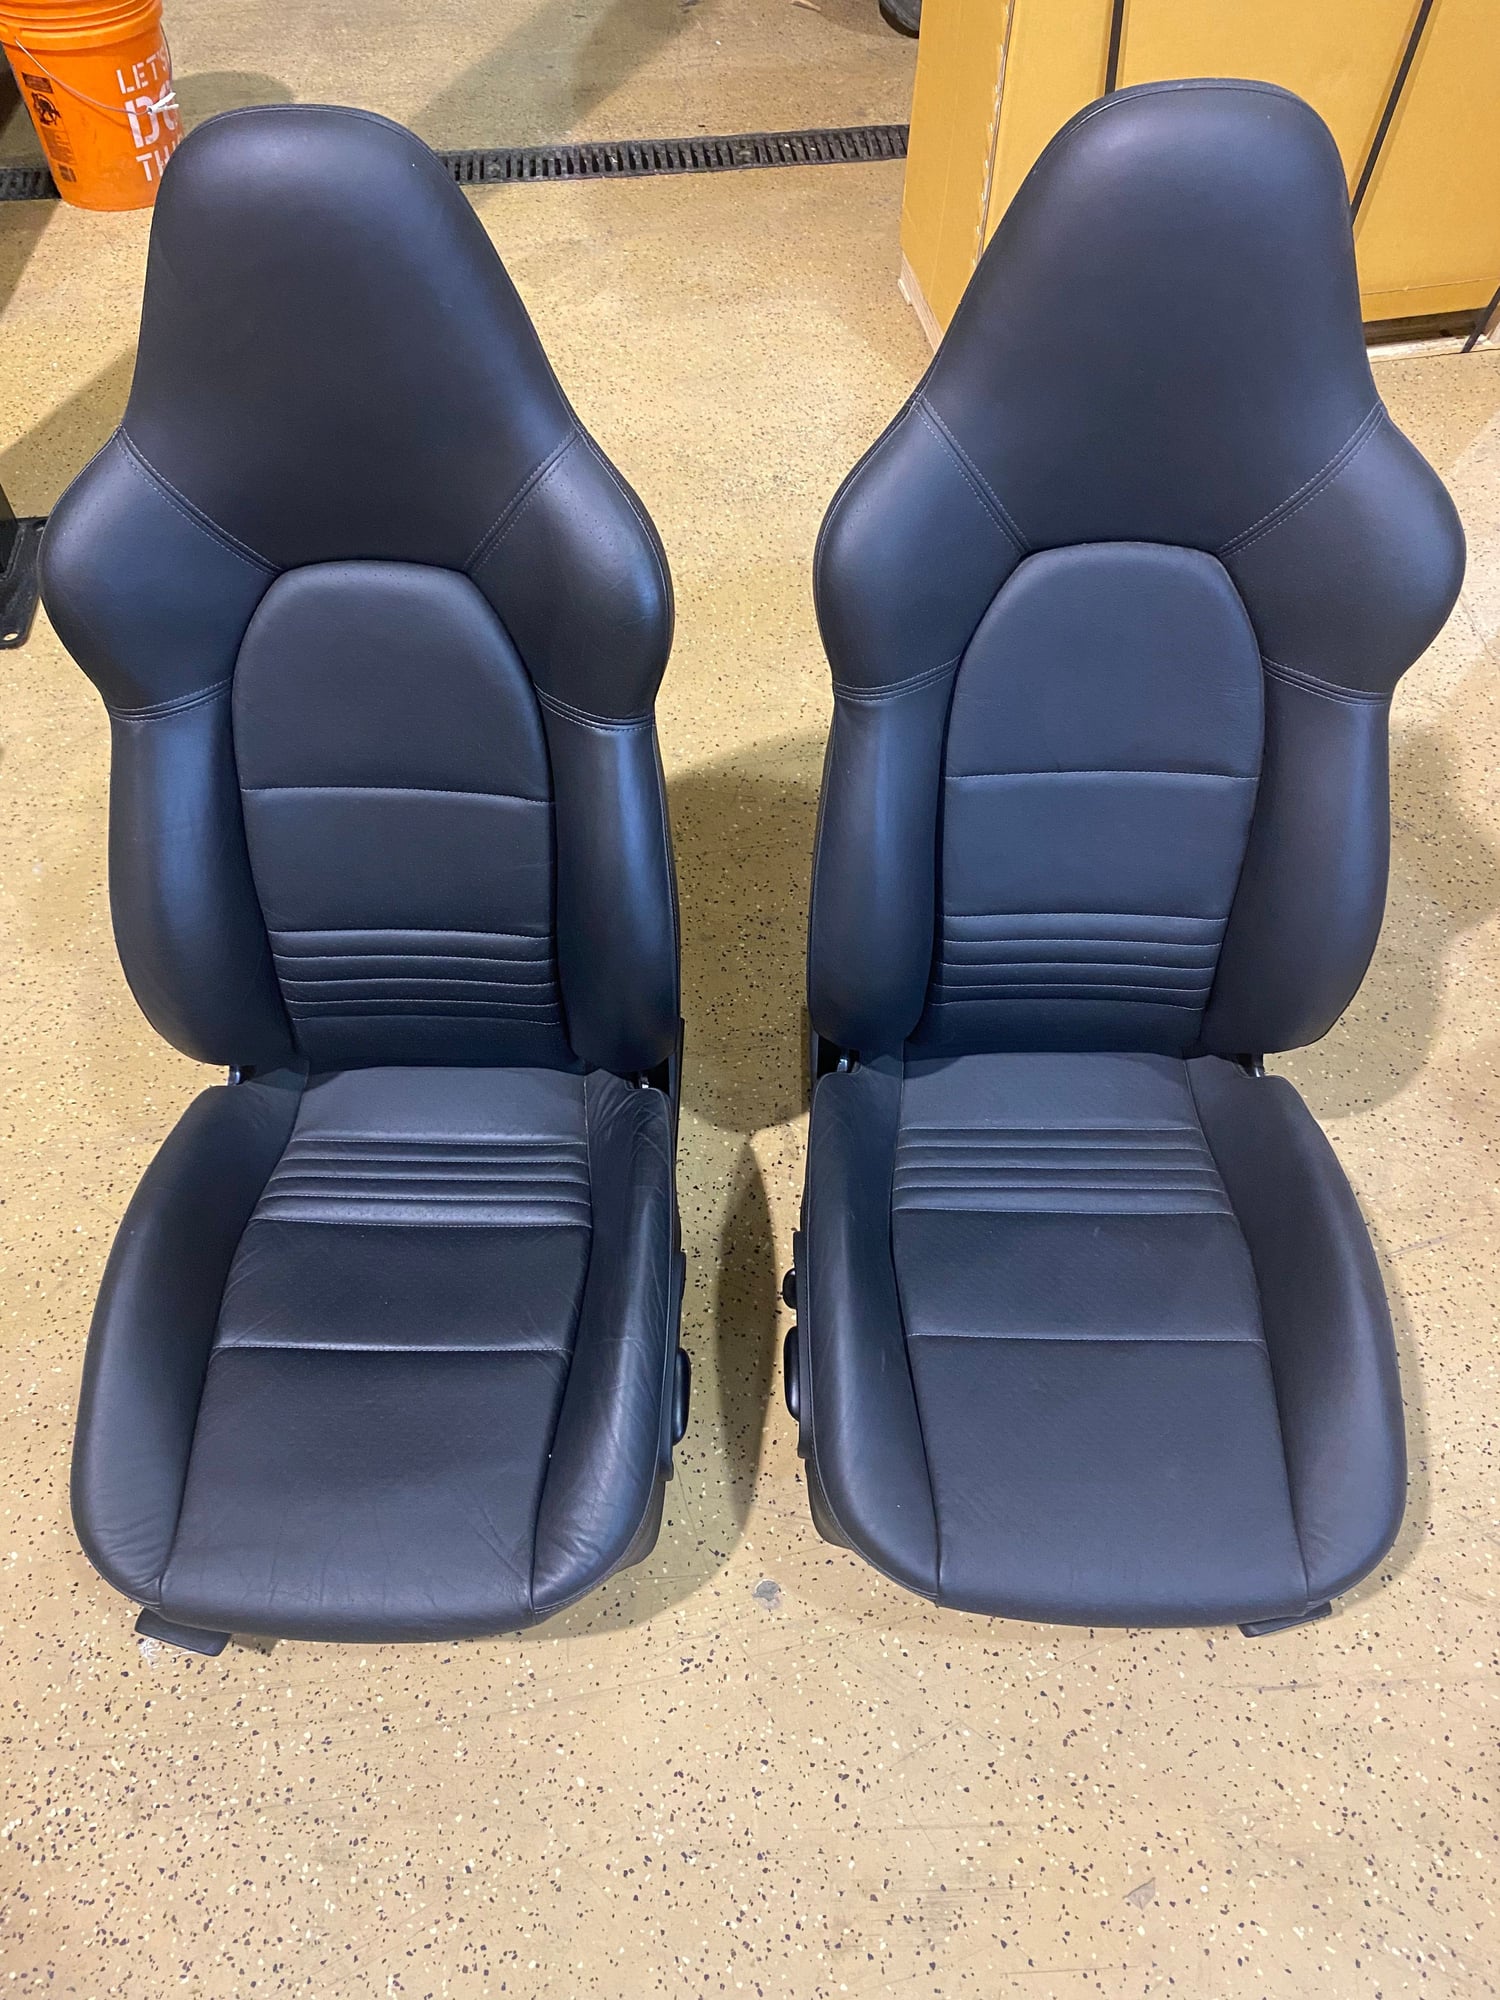 Accessories - 996 GT3 SPORT SEATS - Used - 0  All Models - 0  All Models - Louisville, KY 40299, United States